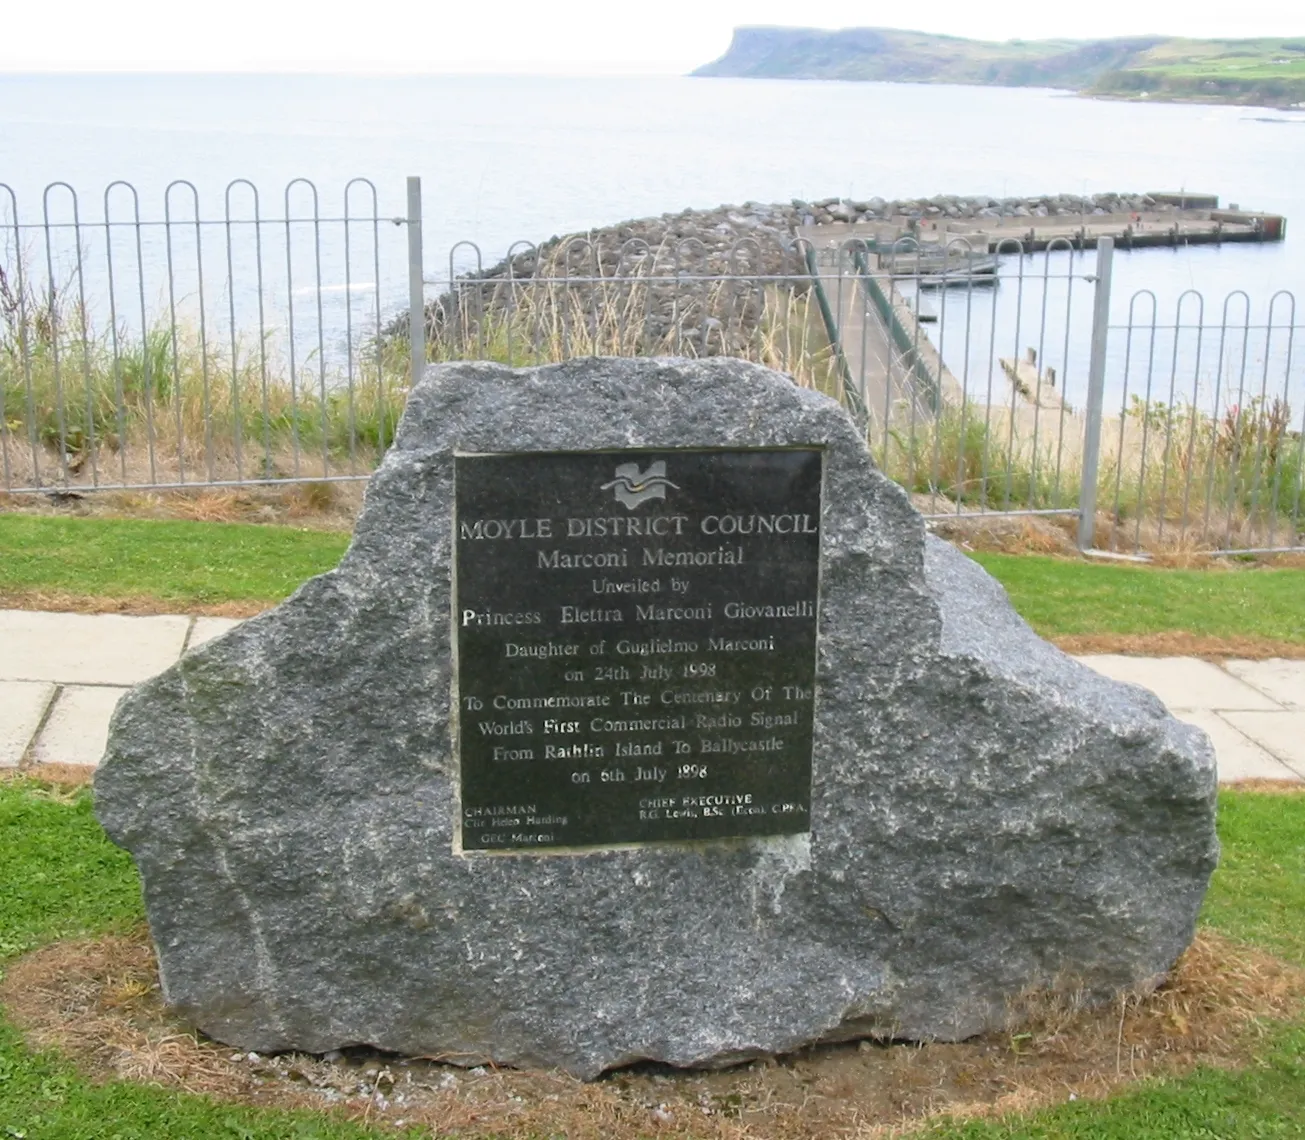 Photo showing: Memorial commemorating radio broadcast experiments carried out by Guglielmo Marconi at Ballycastle, County Antrim.